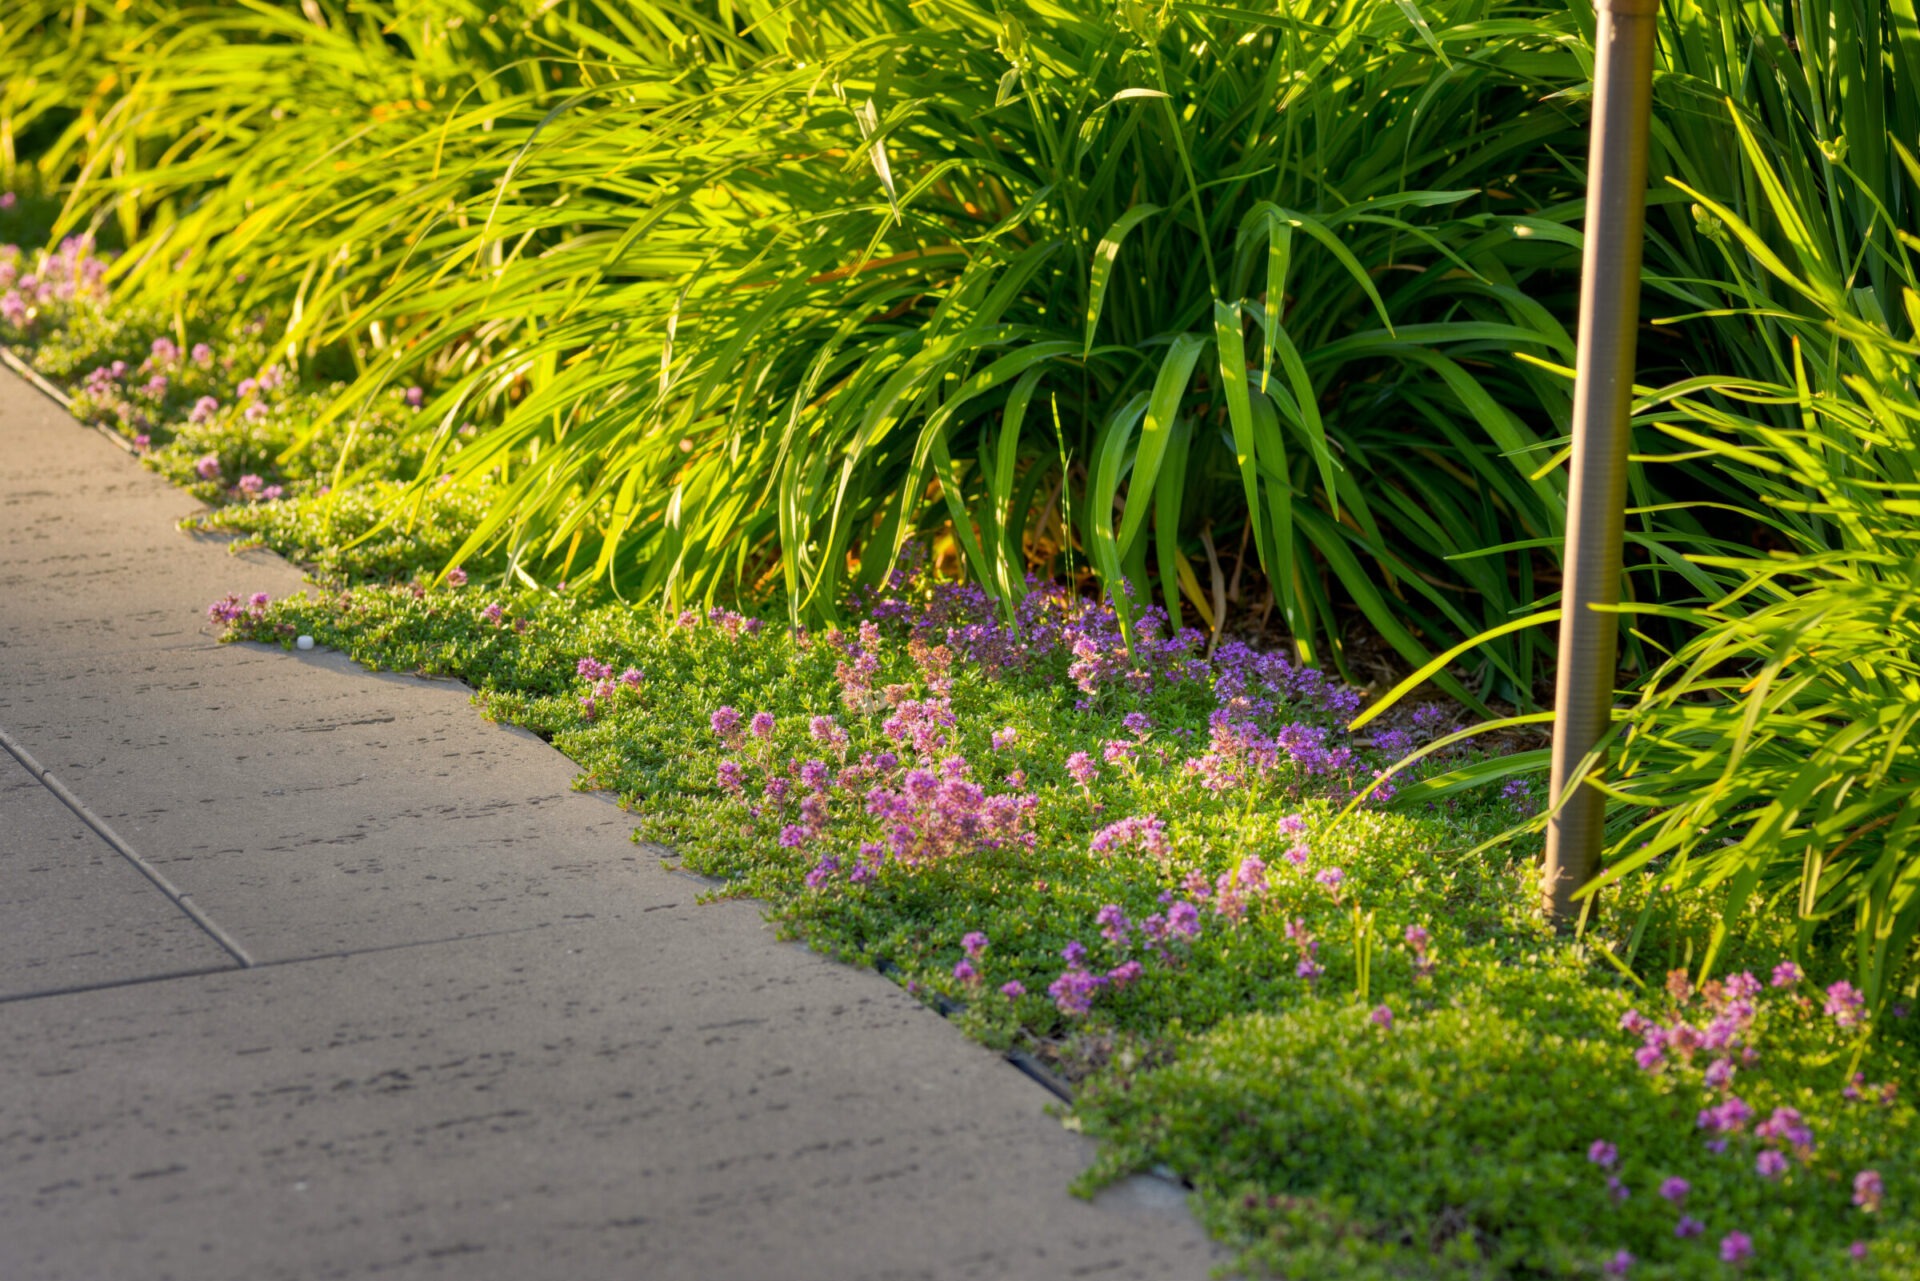 A concrete pathway edged by vibrant purple flowers and lush green grasses, bathed in warm sunlight. There's a metal pole on the right side.